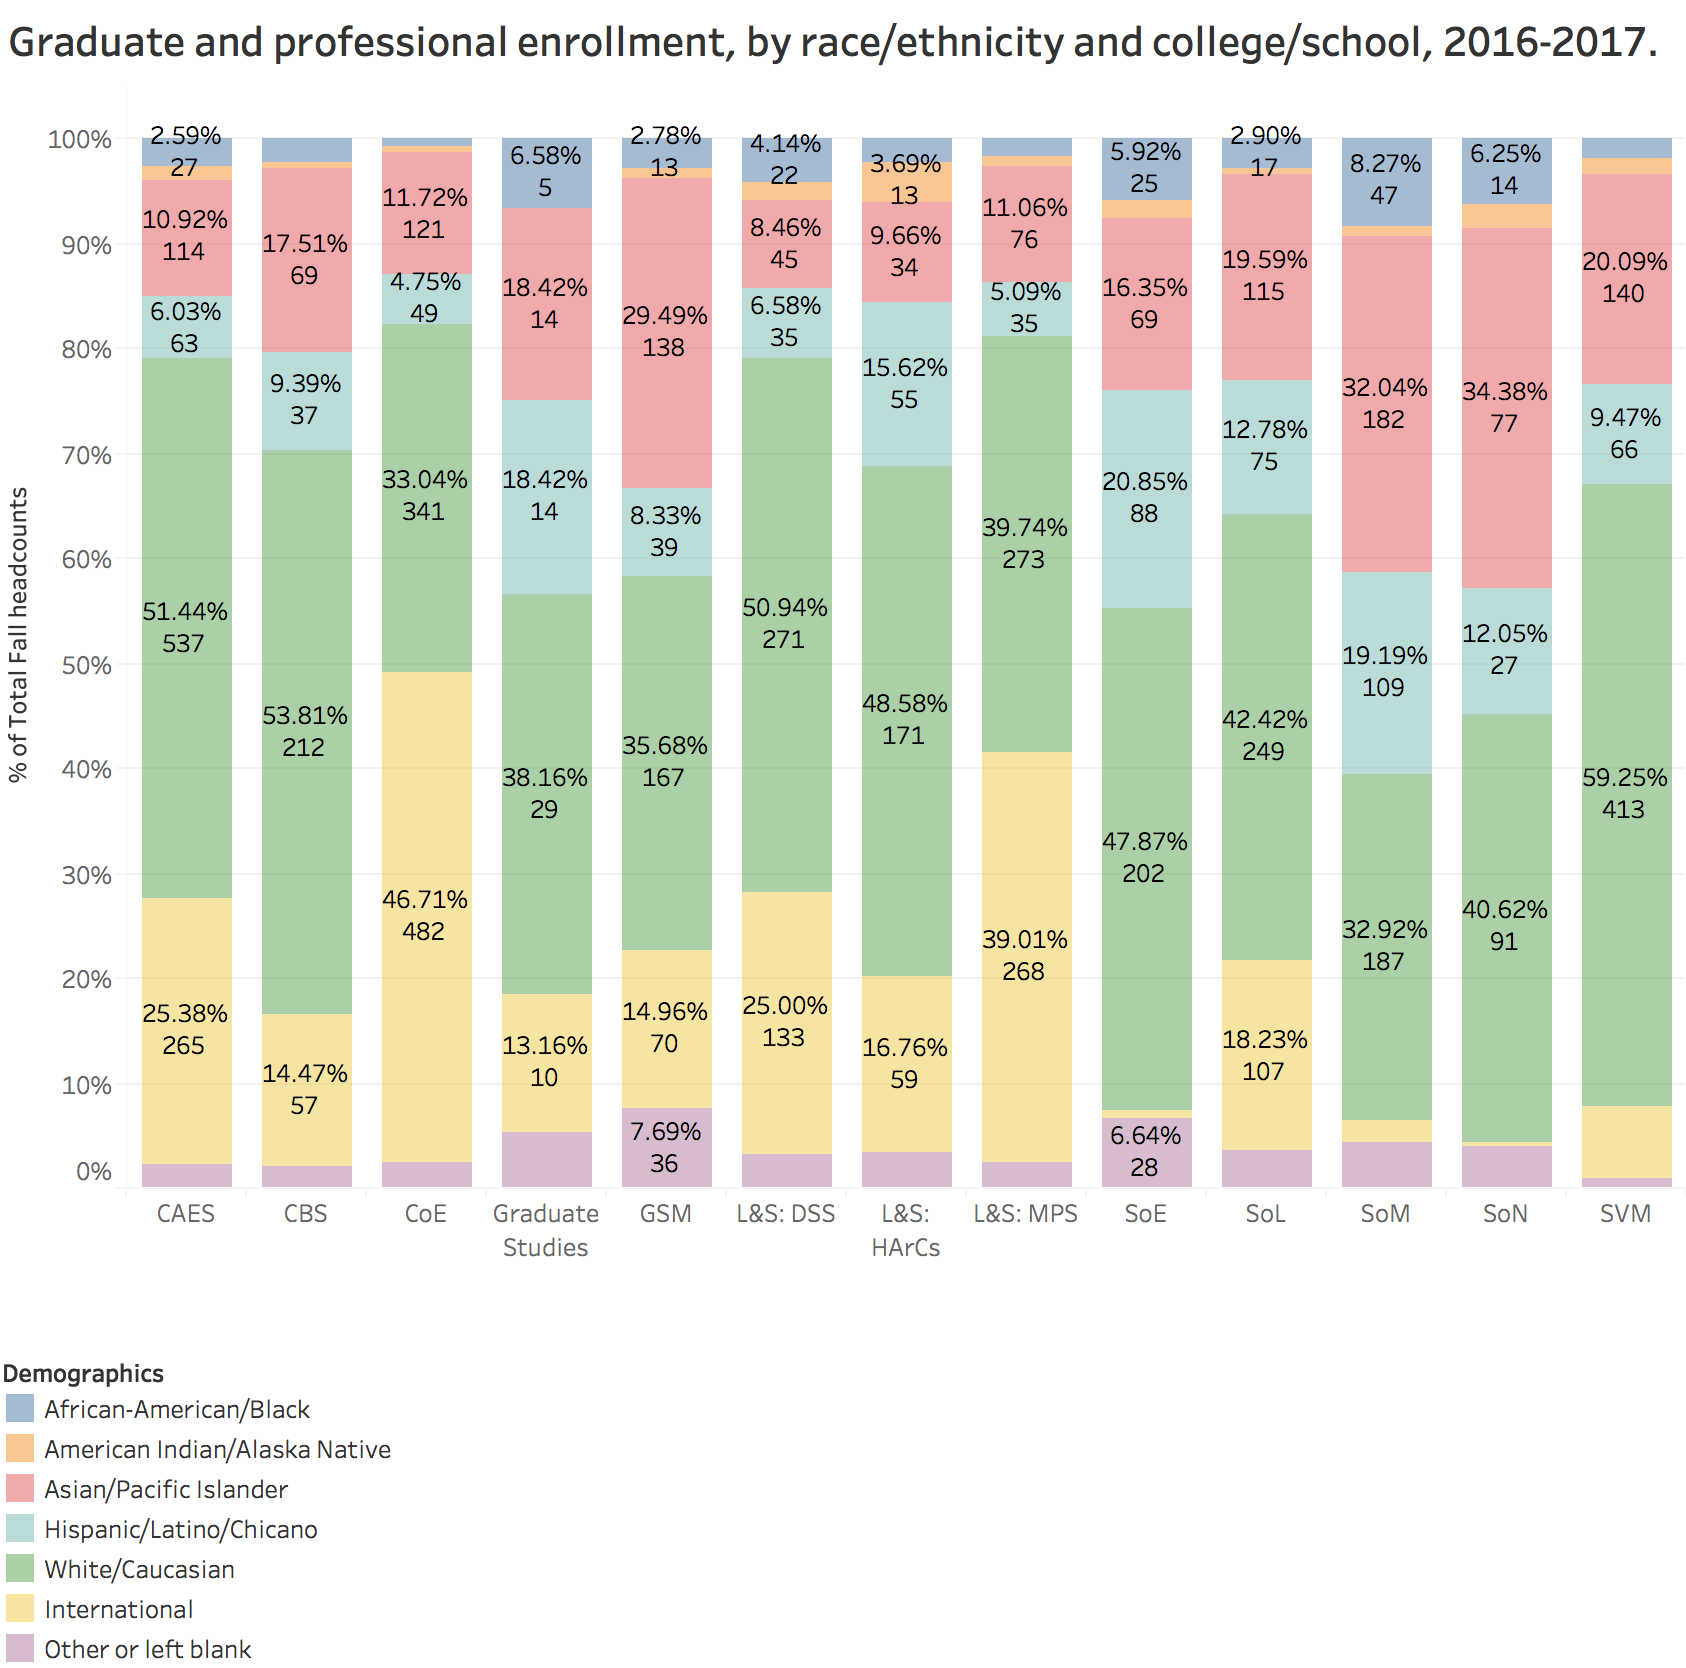 Graduate and professional enrollment, by race/ethnicity and college/school, 2016-2017